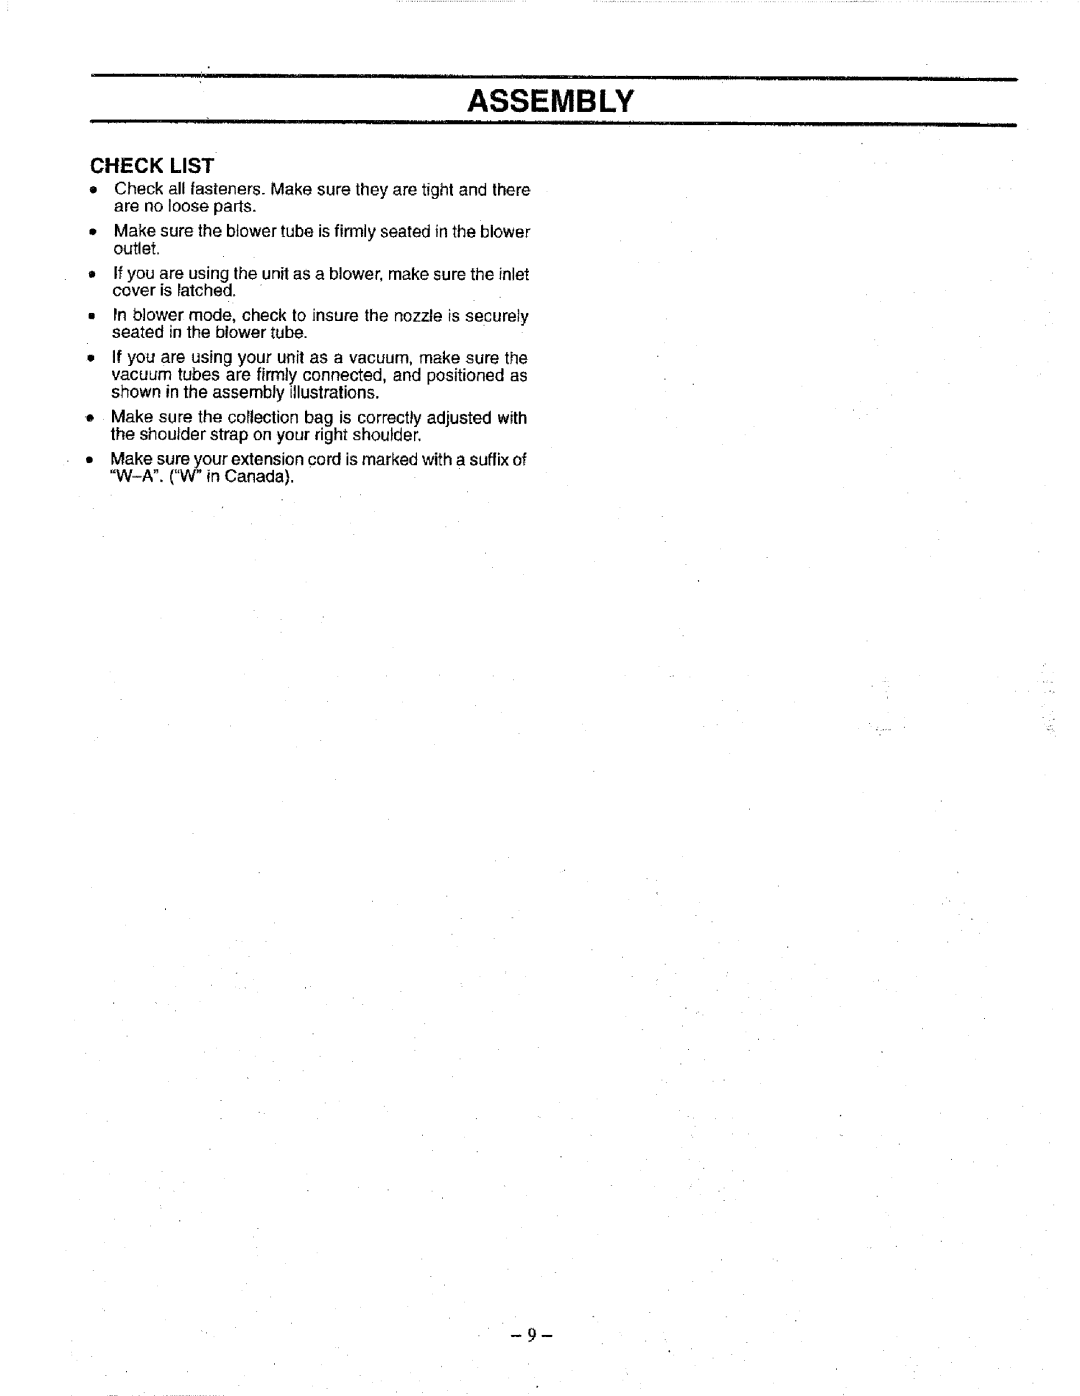 Craftsman 358.798340 manual Check List, Assembly 